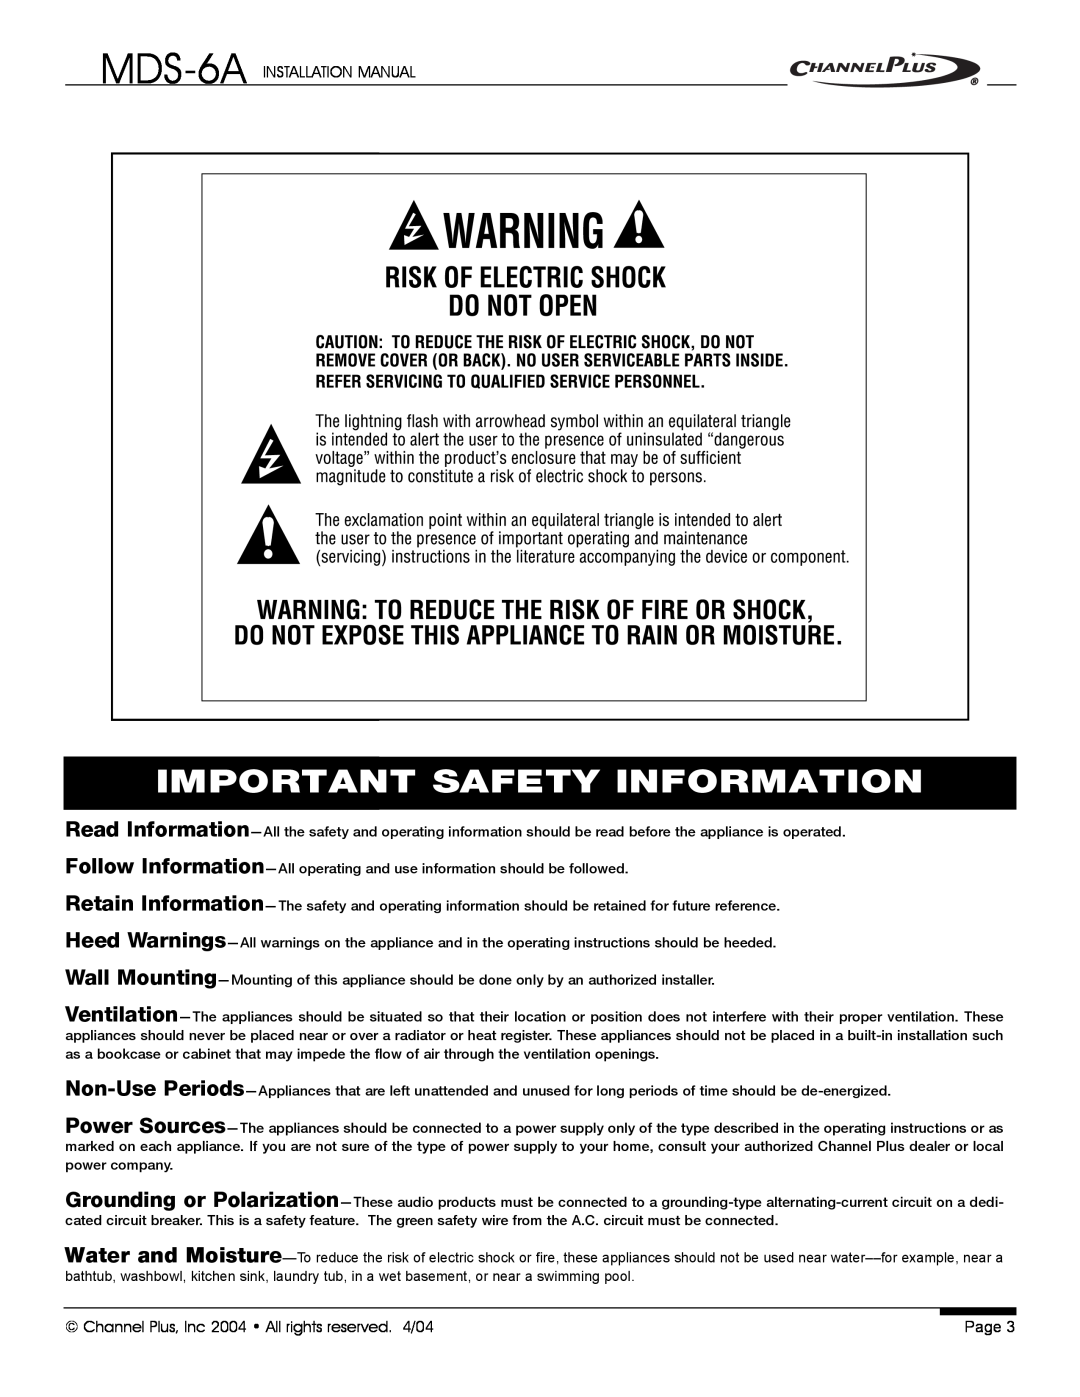 Channel Plus MDS-6A installation manual Important Safety Information 